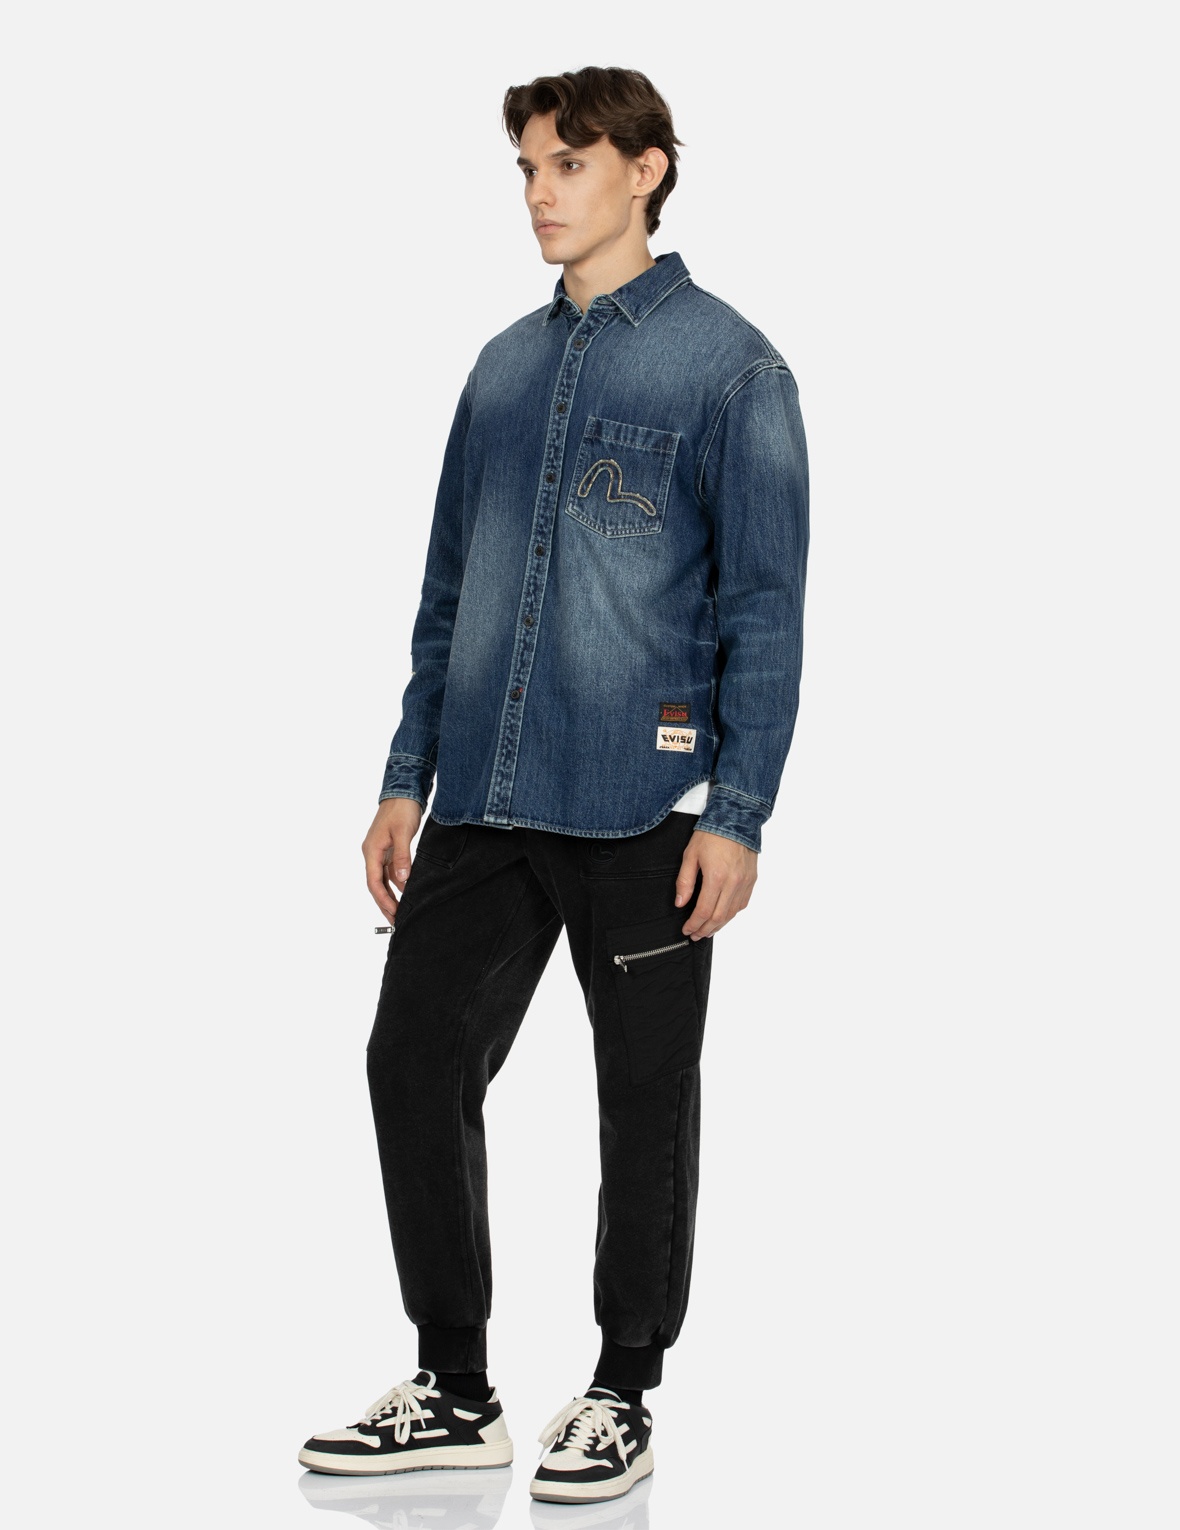 GRUNGE STYLE LOGO AND SEAGULL APPLIQUÉ RELAX FIT DENIM SHIRT - 4